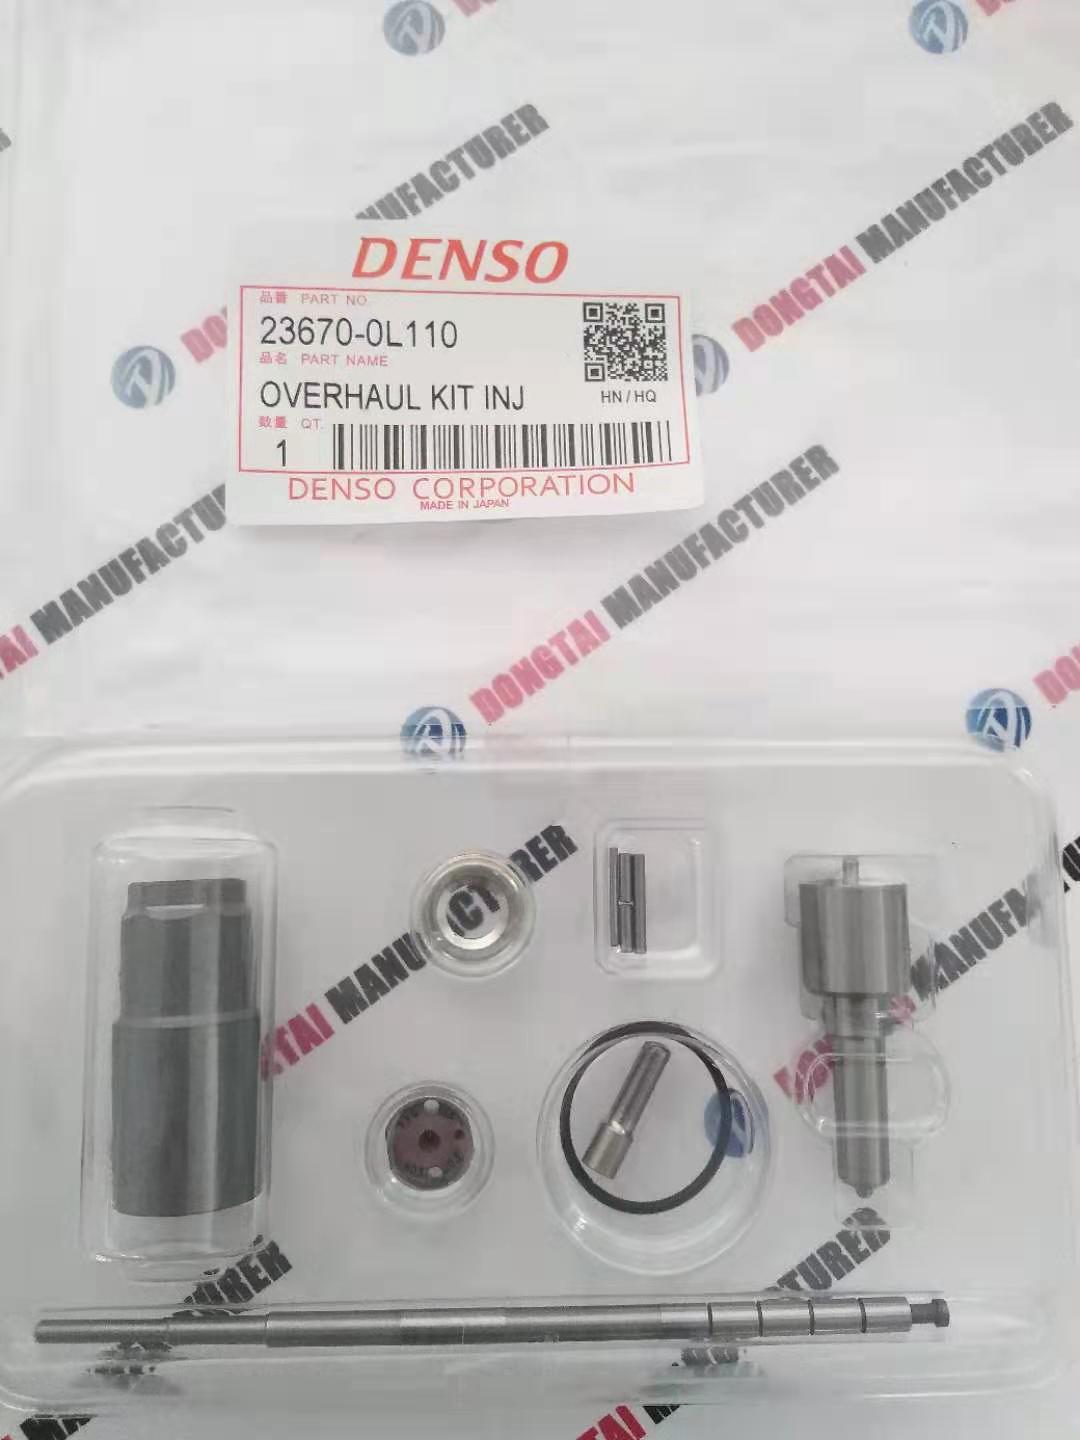 DENSO Common Rail Injector Repair Kits For 23670-0L110